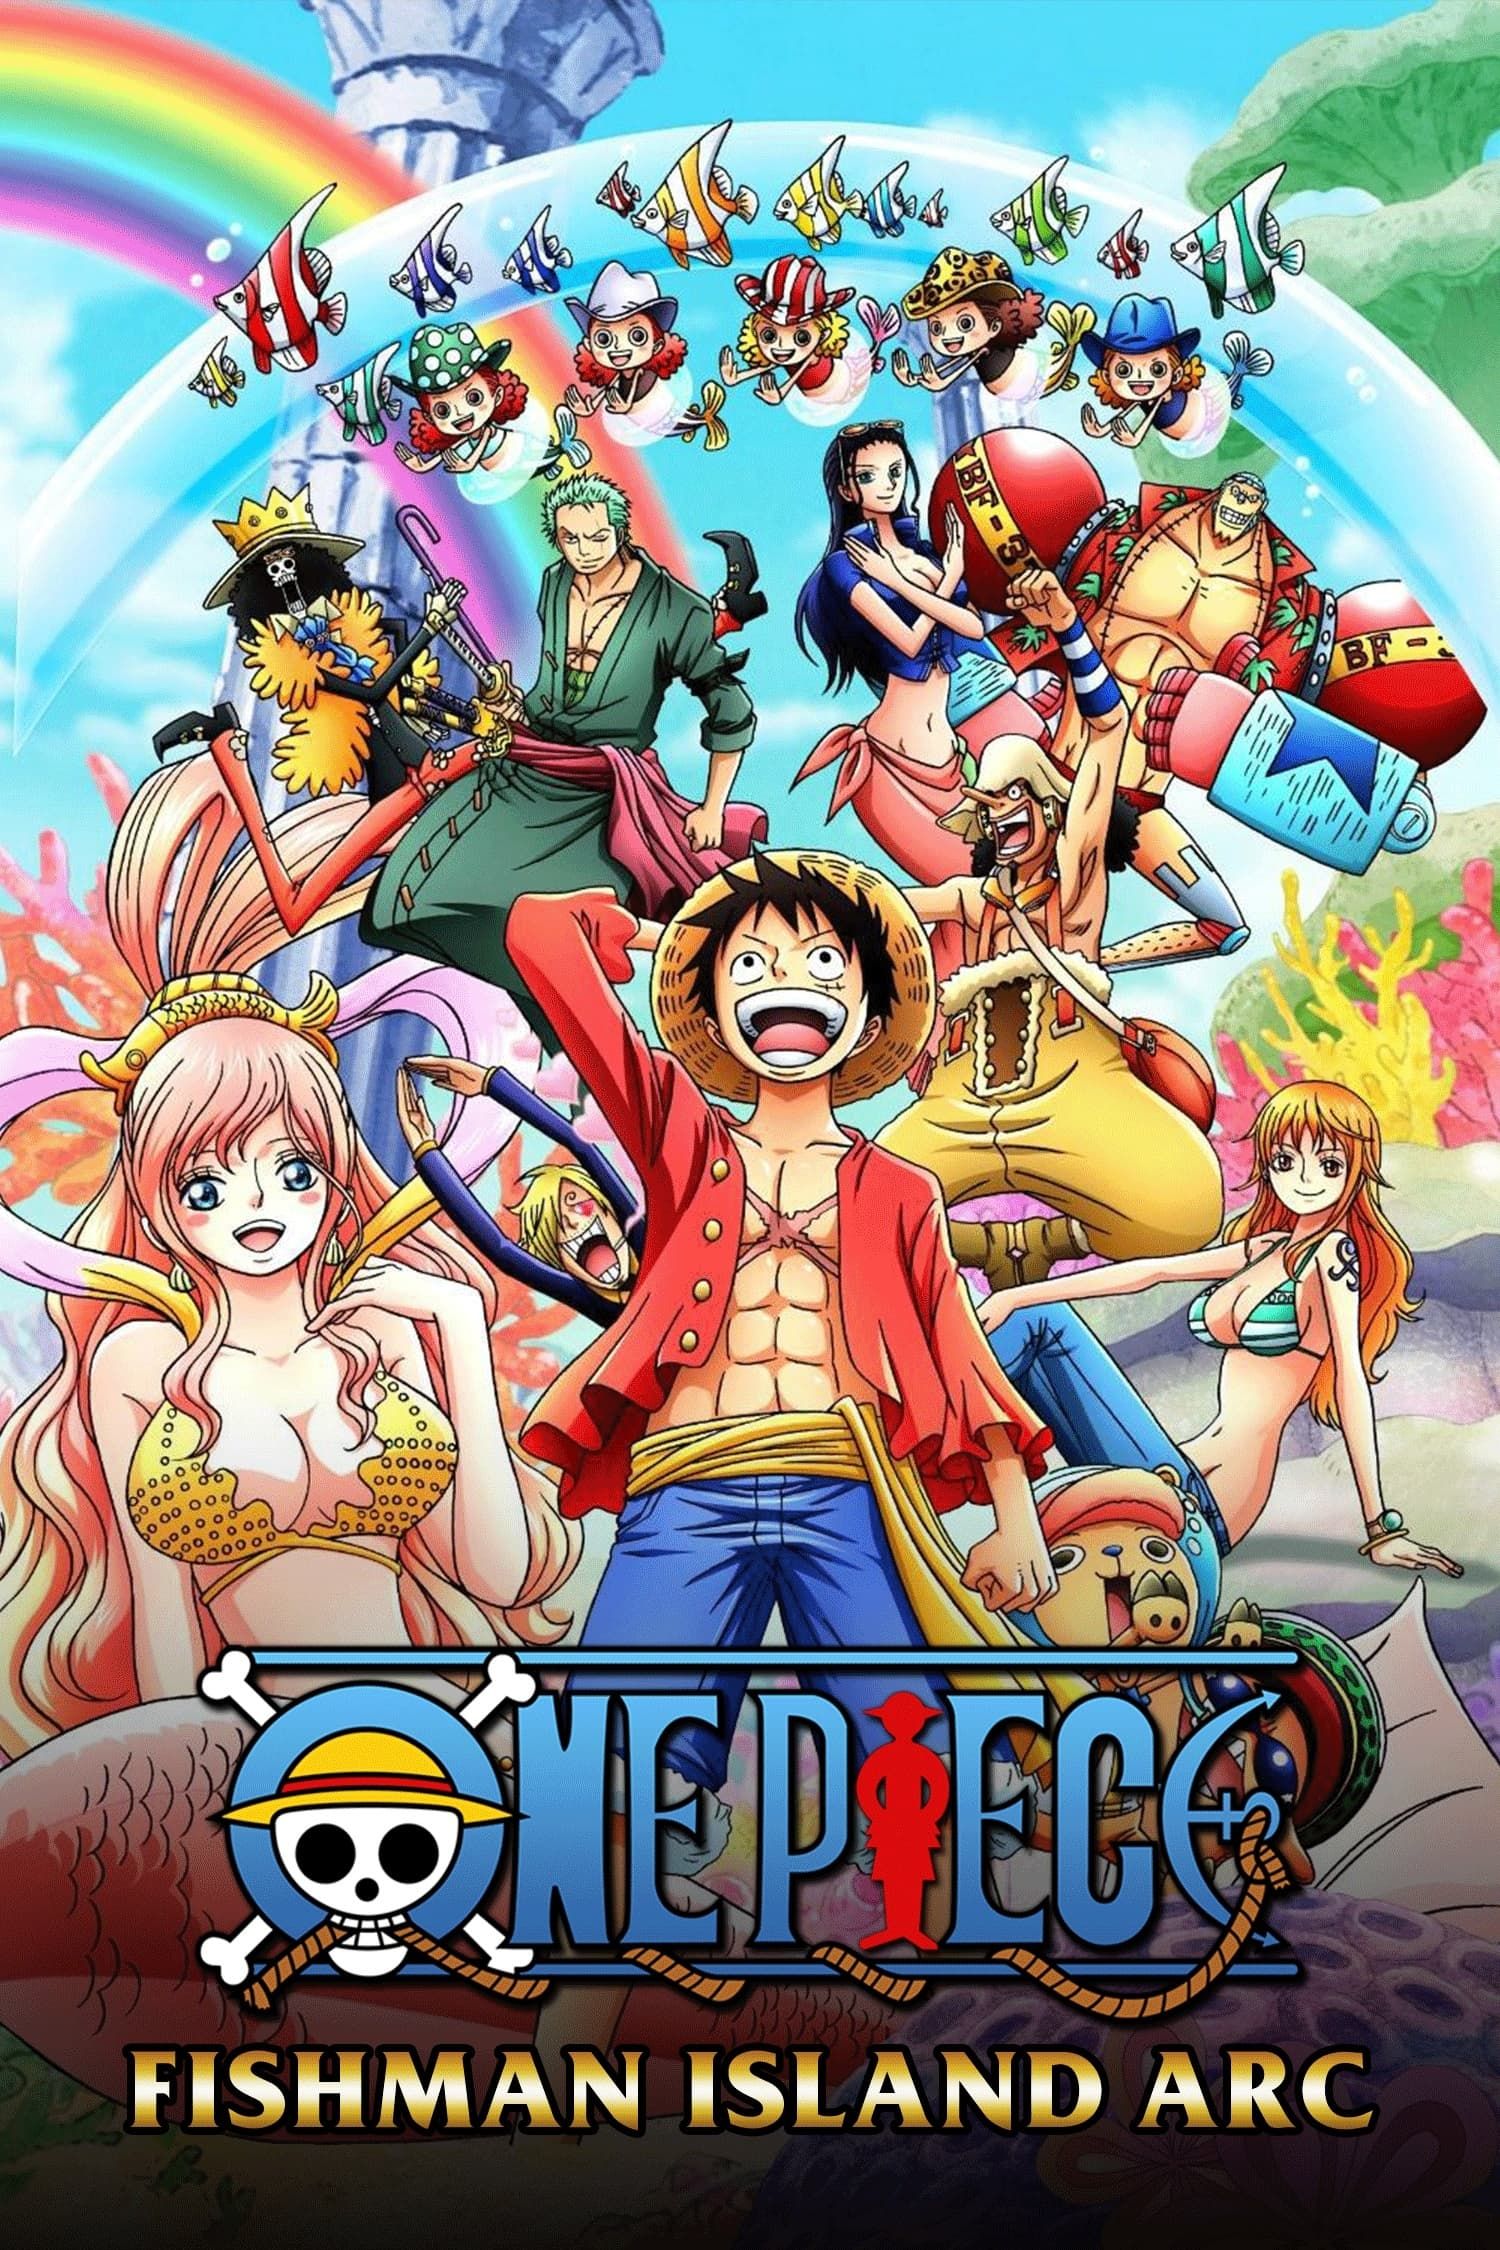 For those who watched the One Piece movies, What is your general